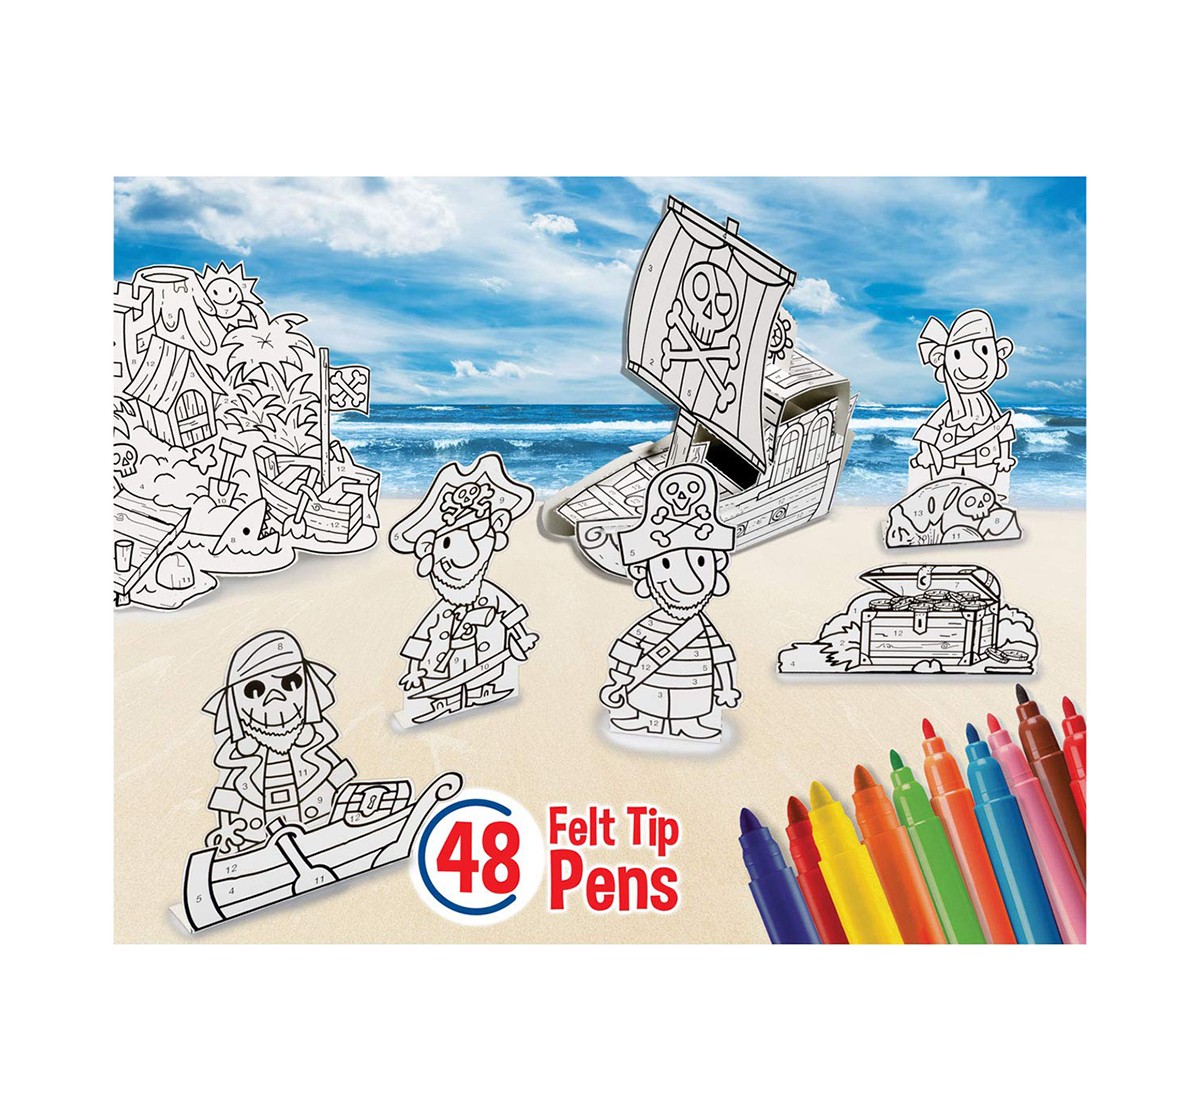 Luxor Carioca Pirates-3D Pop-Up Model+ 48 Color School Stationery for Kids age 3Y+ 